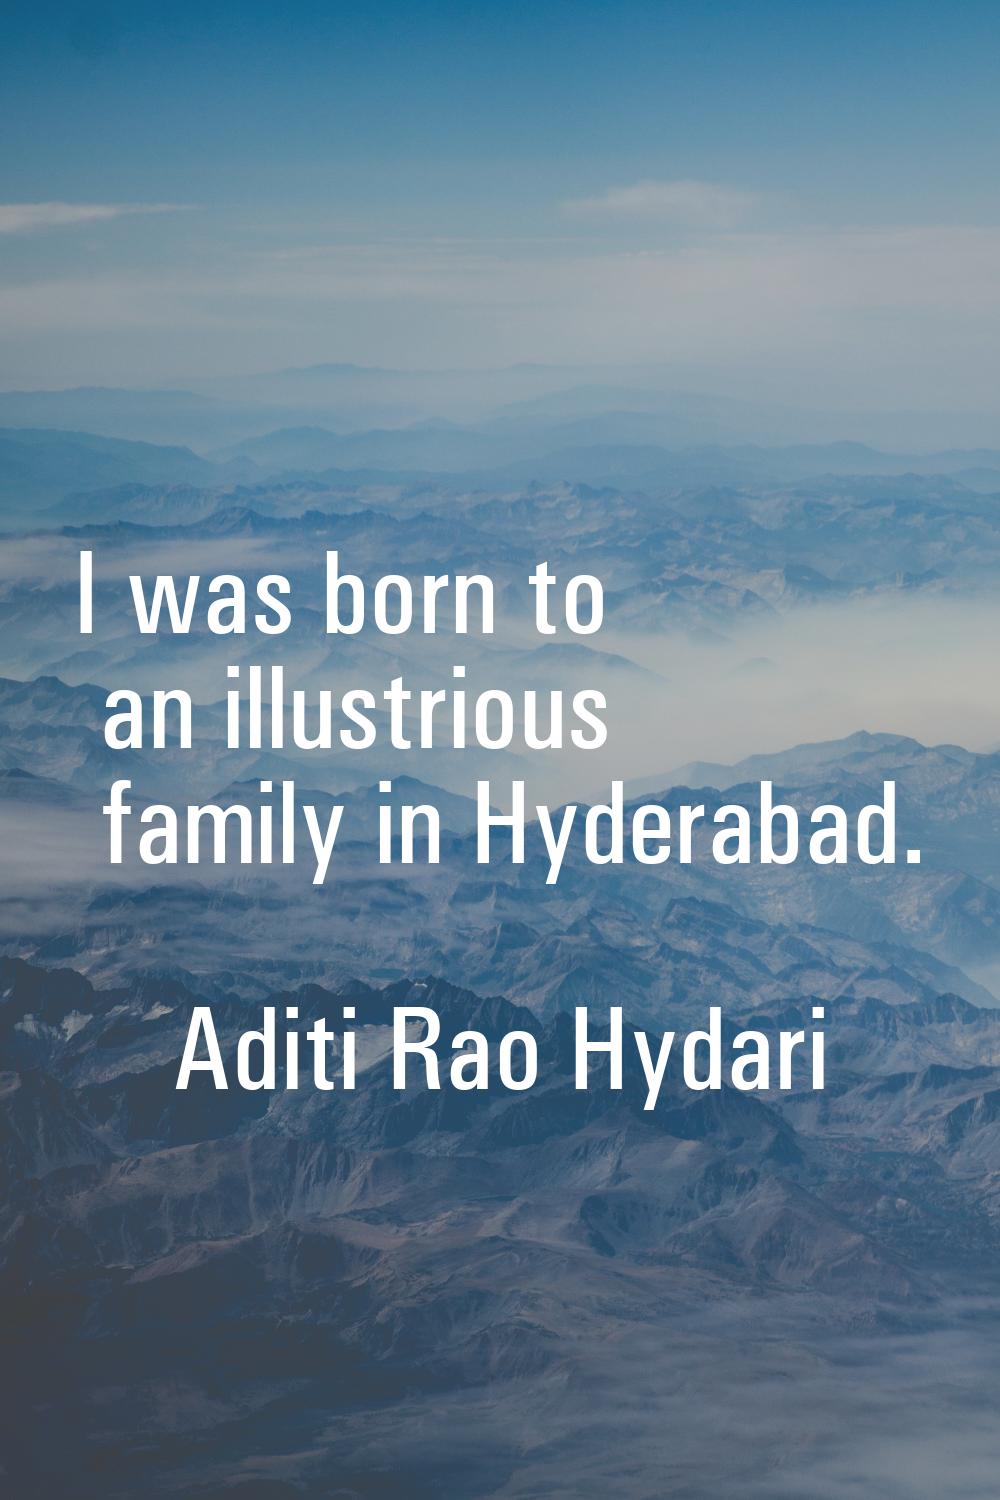 I was born to an illustrious family in Hyderabad.